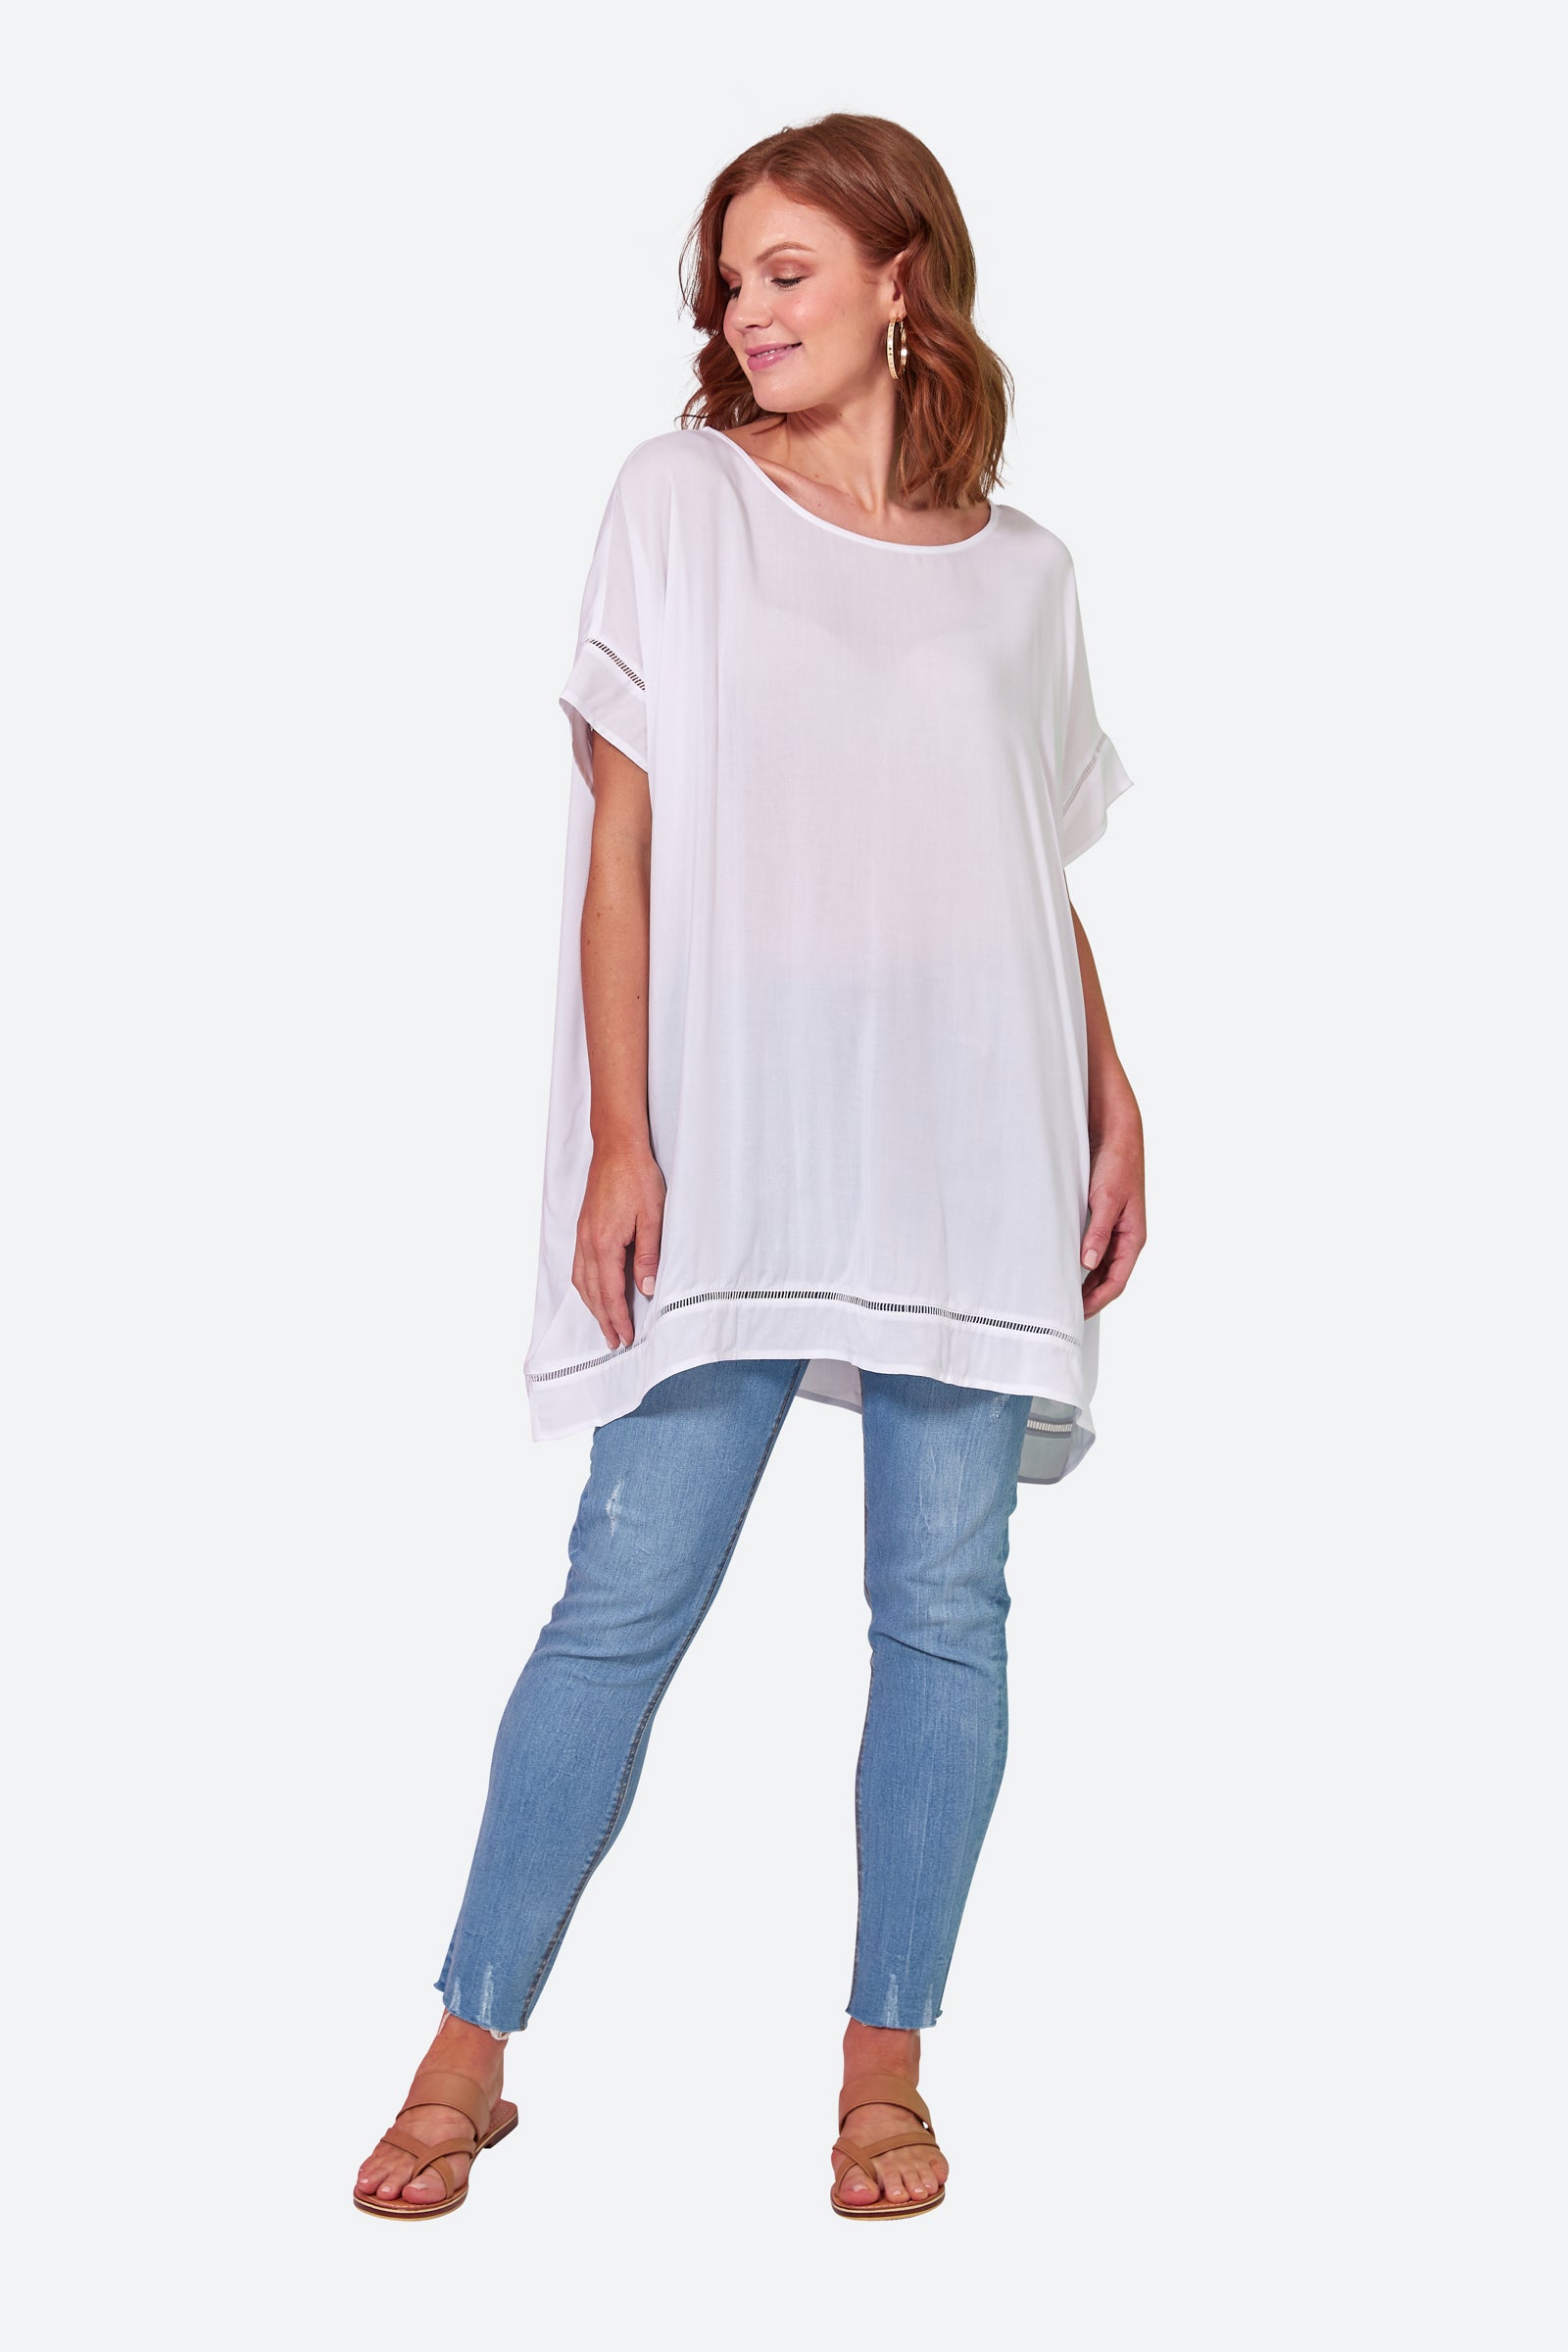 Esprit Relax Top - Blanc - eb&ive Clothing - Top S/S One Size